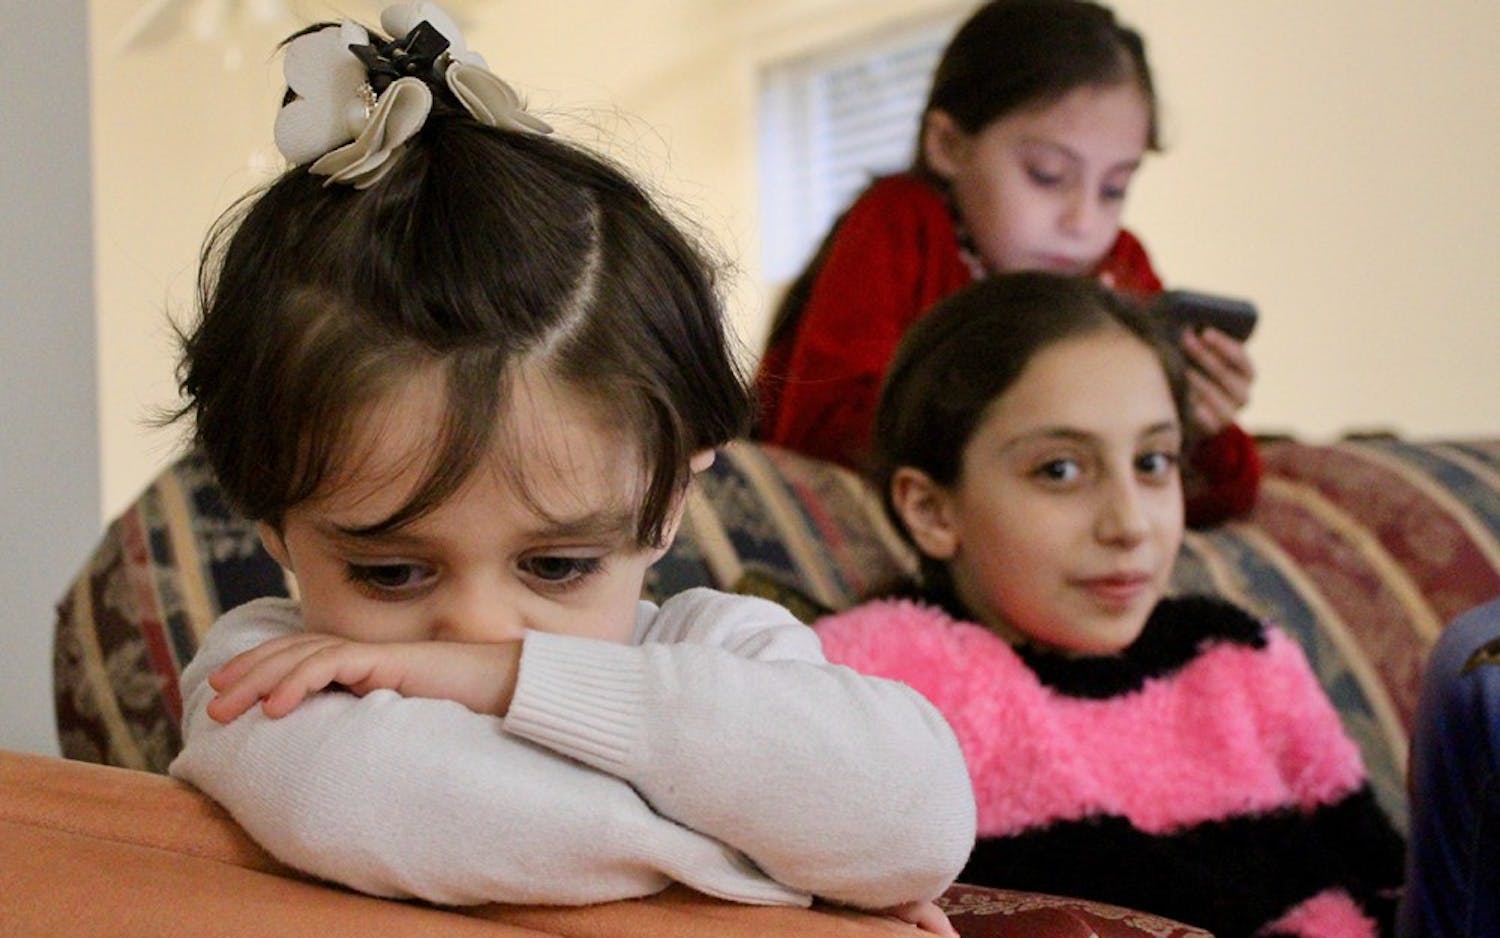 The Lababidi daughters, Remas, 3; Samira, 10; and Sara, 7, relax in the living room of the family's two-bedroom Indianapolis apartment. Samira and Sara have been attending&nbsp;public school despite speaking very limited English.&nbsp;